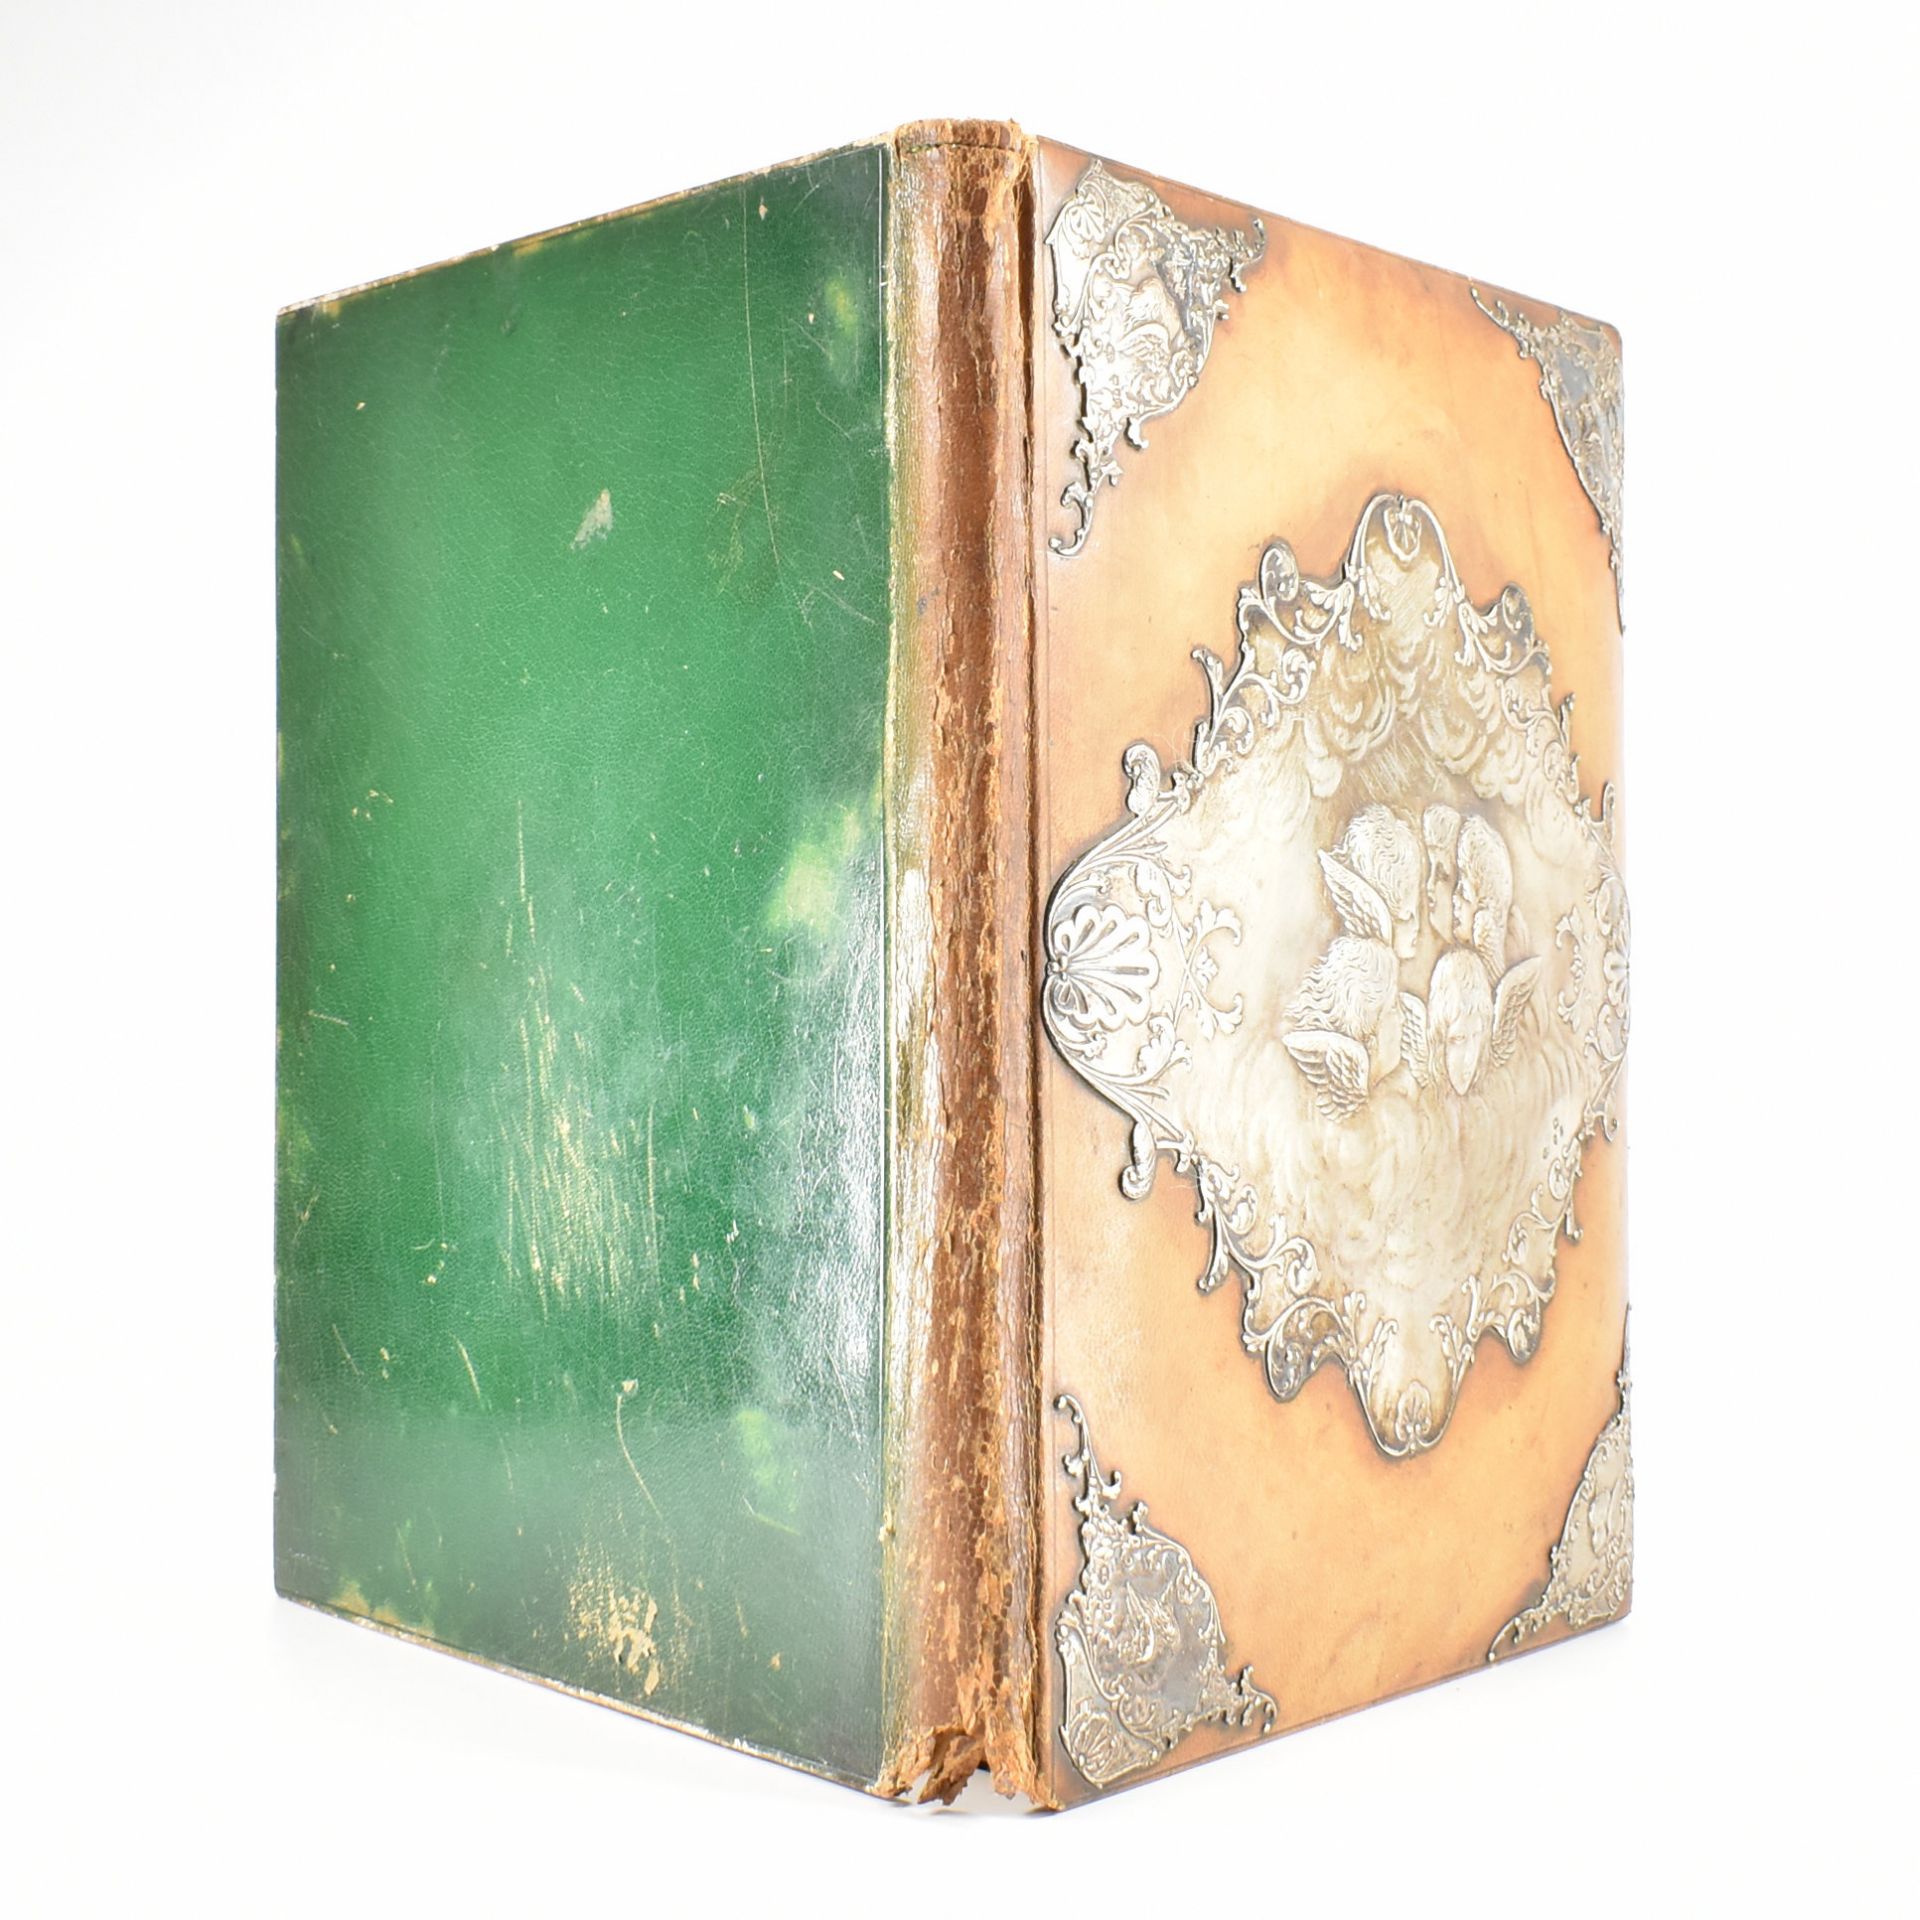 VICTORIAN PHOTOGRAPH ALBUM COVER WITH SILVER PANELING - Image 4 of 5